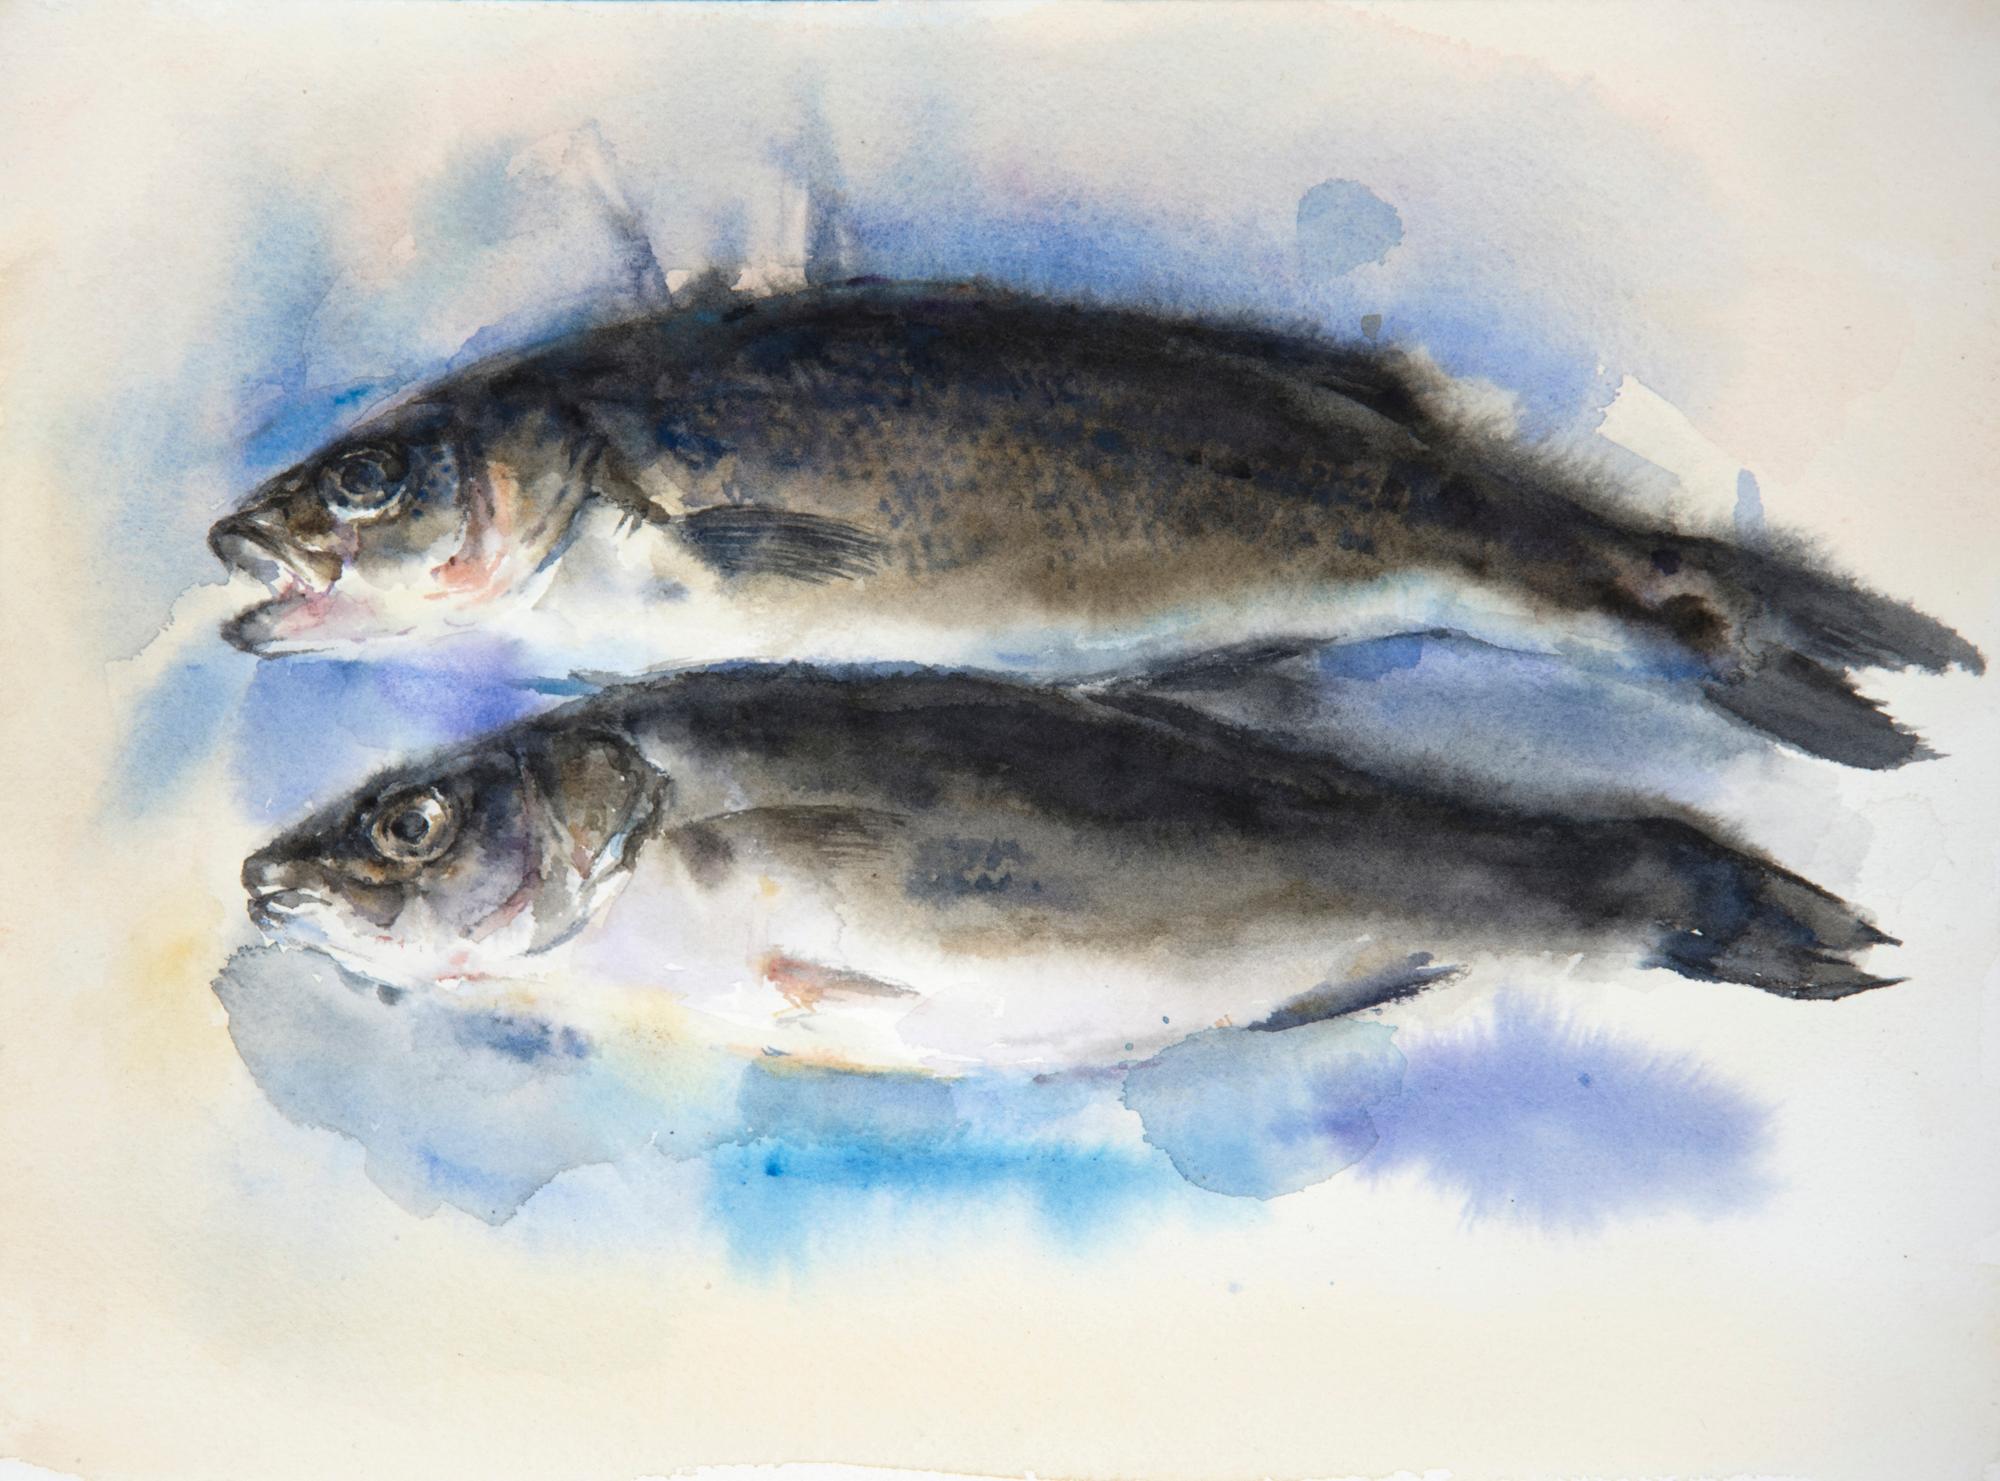 Wendy Artin Animal Art - "Two Spigole" watercolor painting of two fish with blue behind